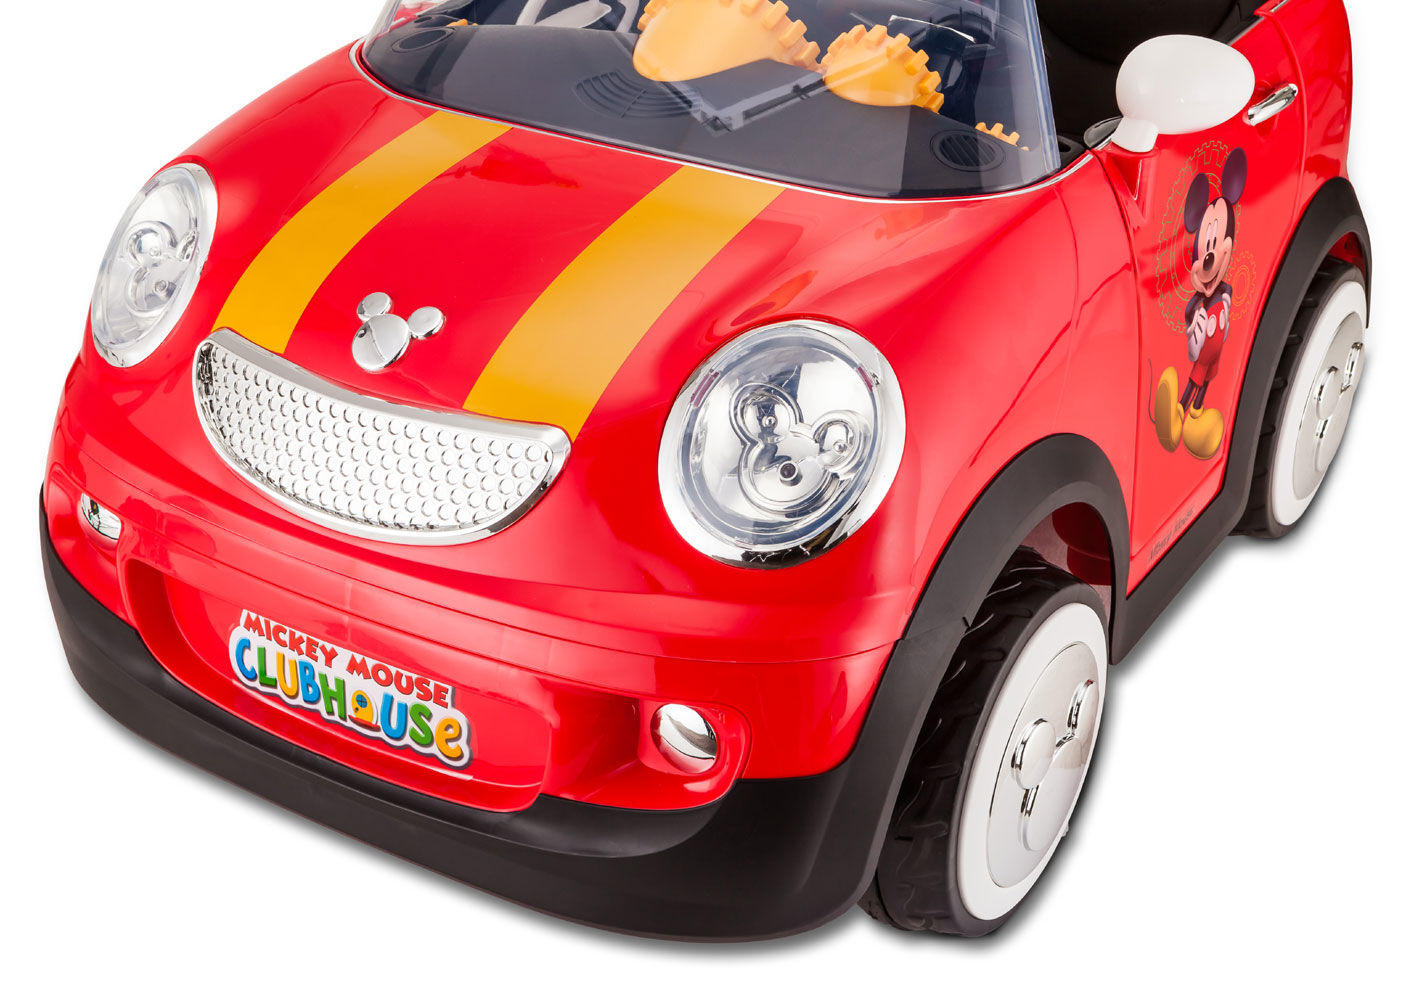 mickey mouse coupe car